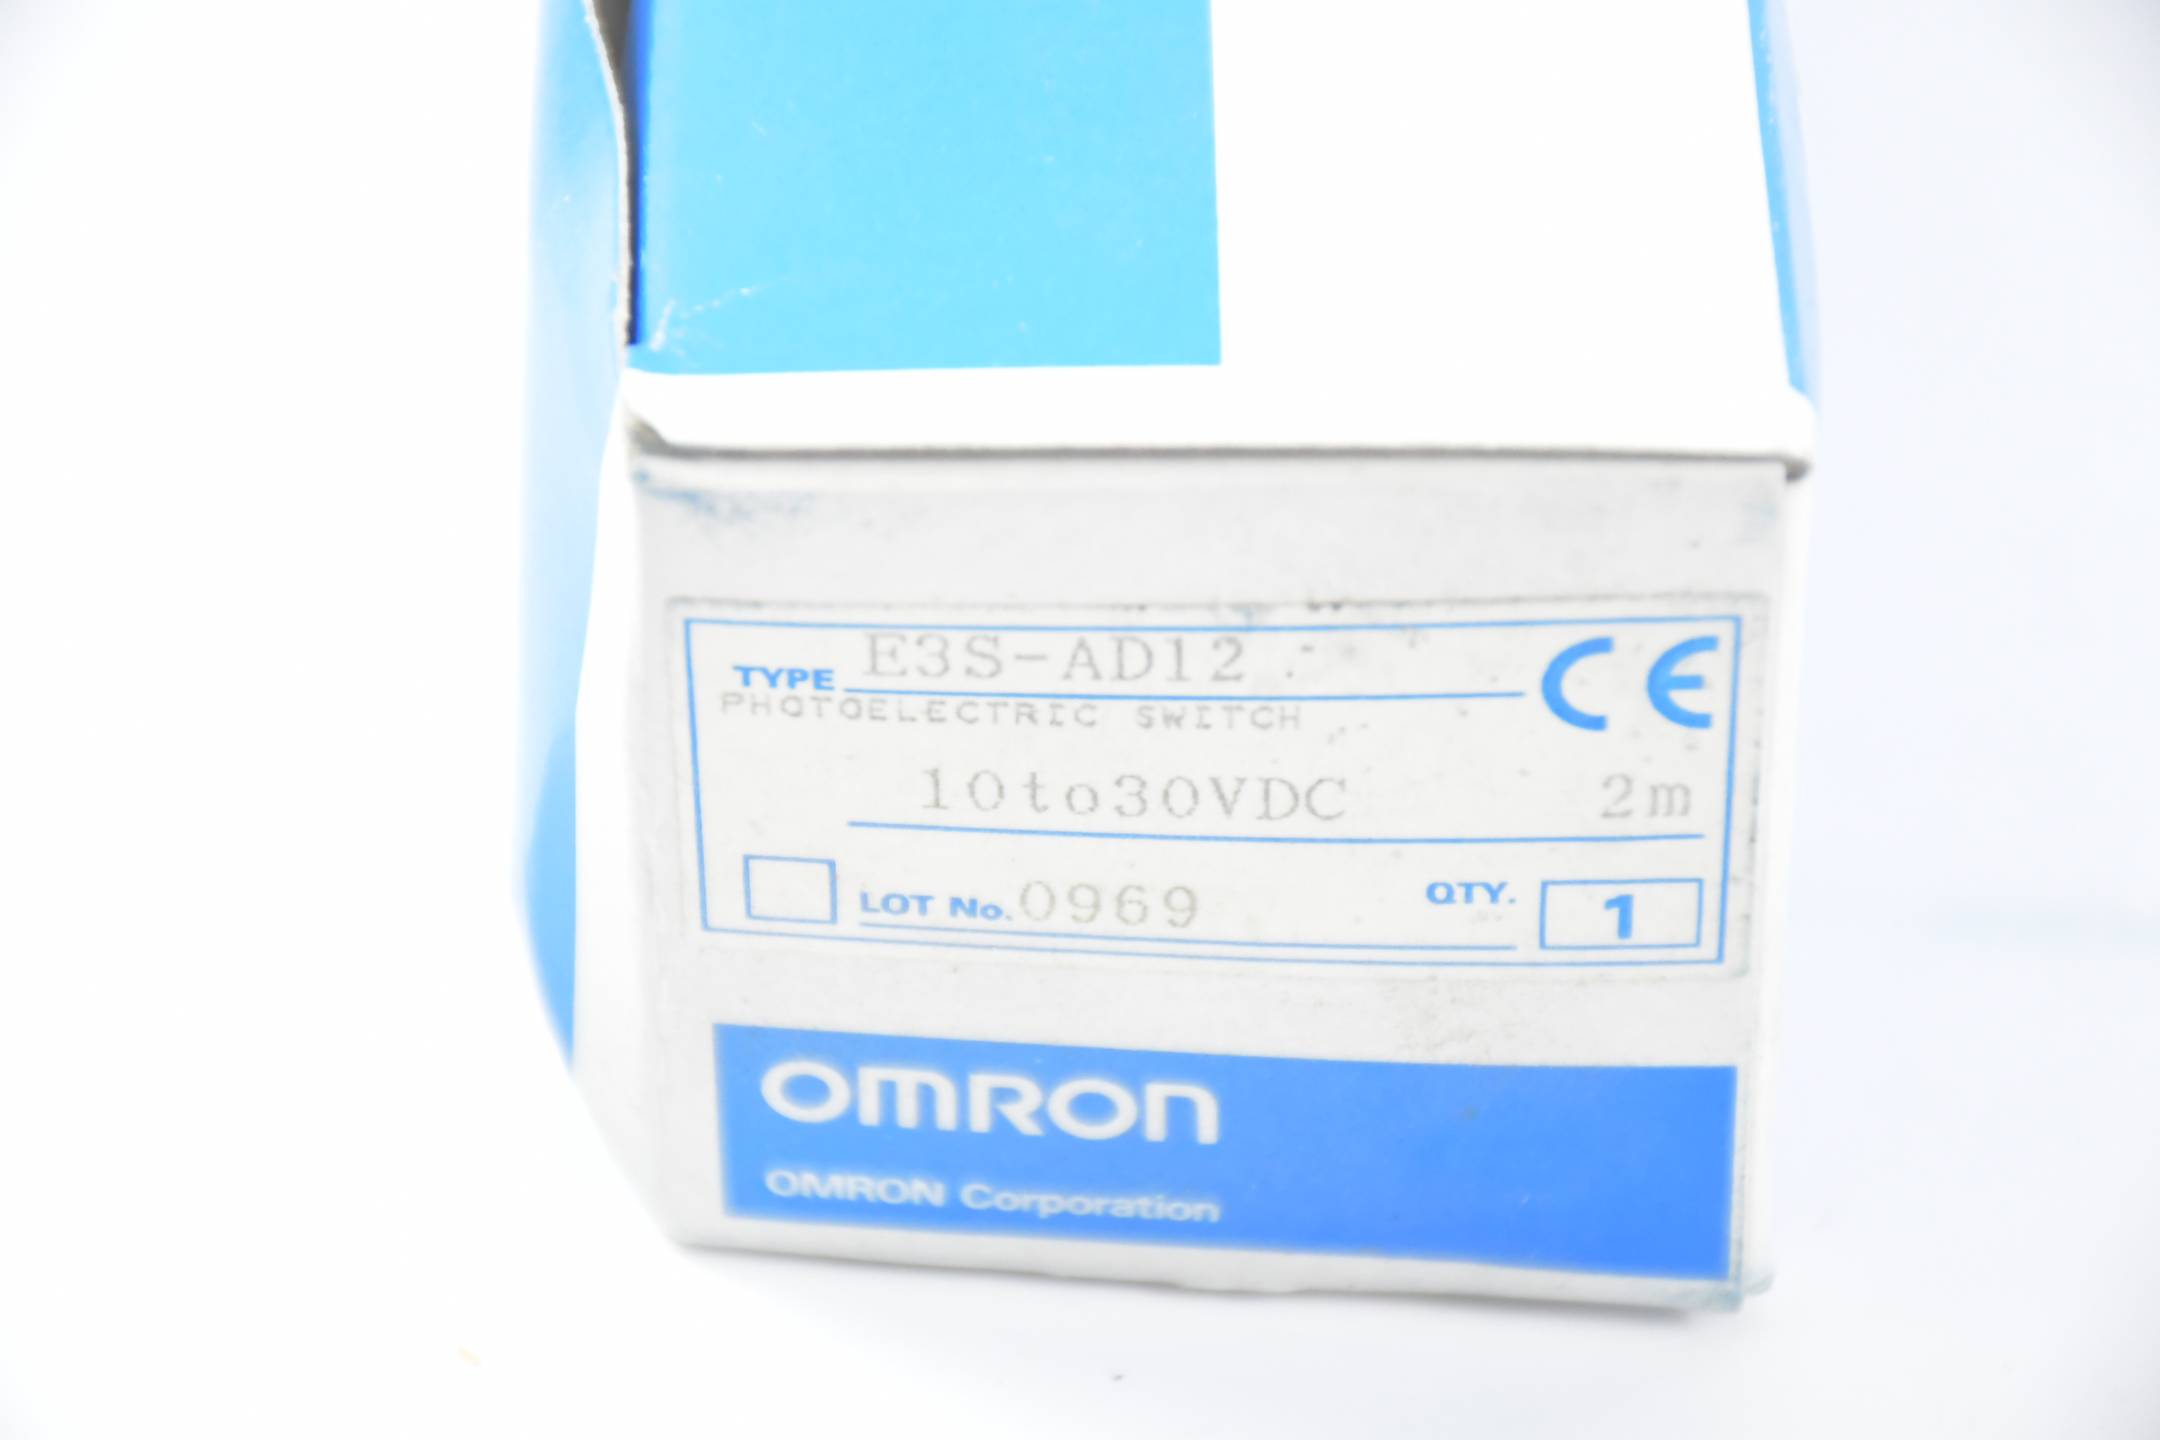 Omron Photoelectric Switch 10 to 30VDC 2m ( E3S-AD12 )